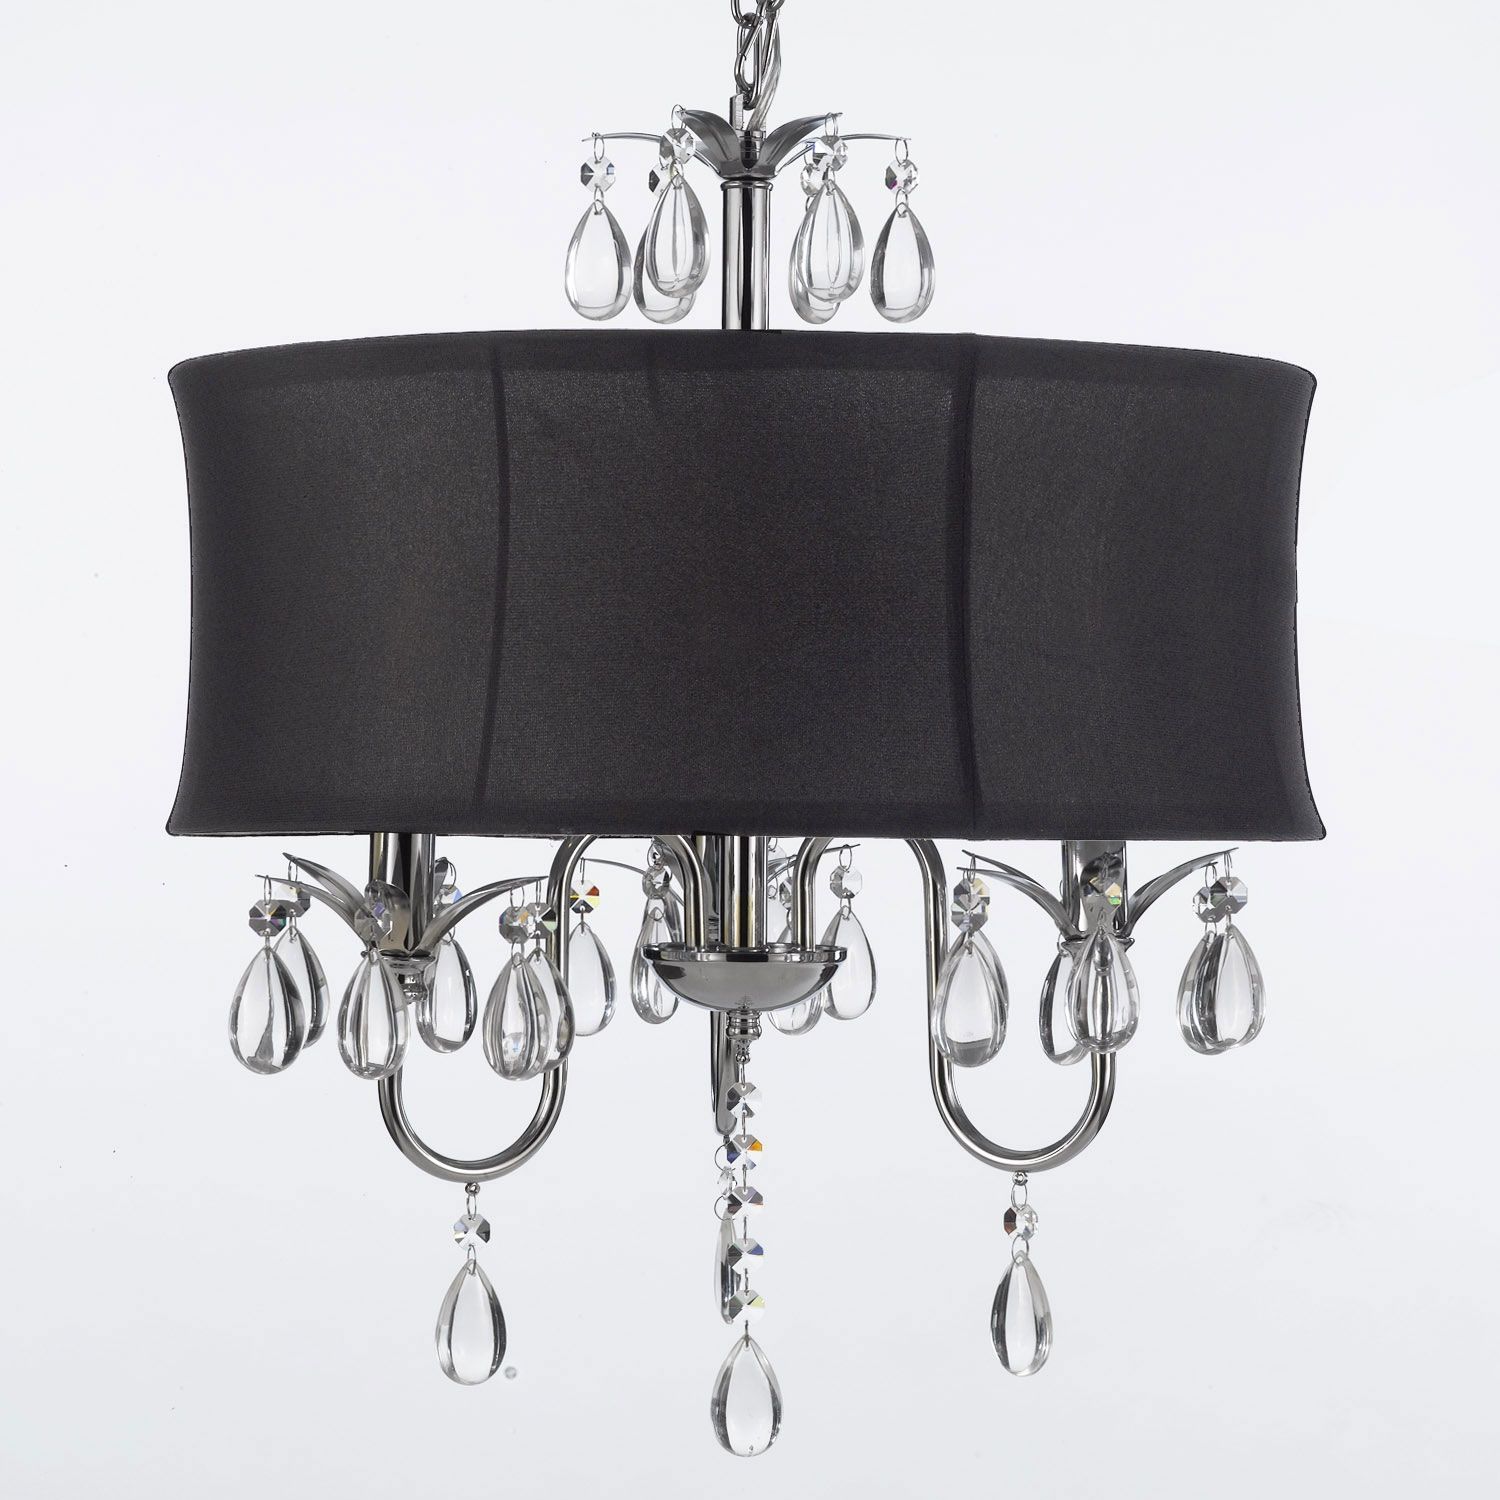 Chandelier Crystaldelier With Black Shade Shadesblack Drum With Regard To Black Chandeliers With Shades (View 4 of 25)